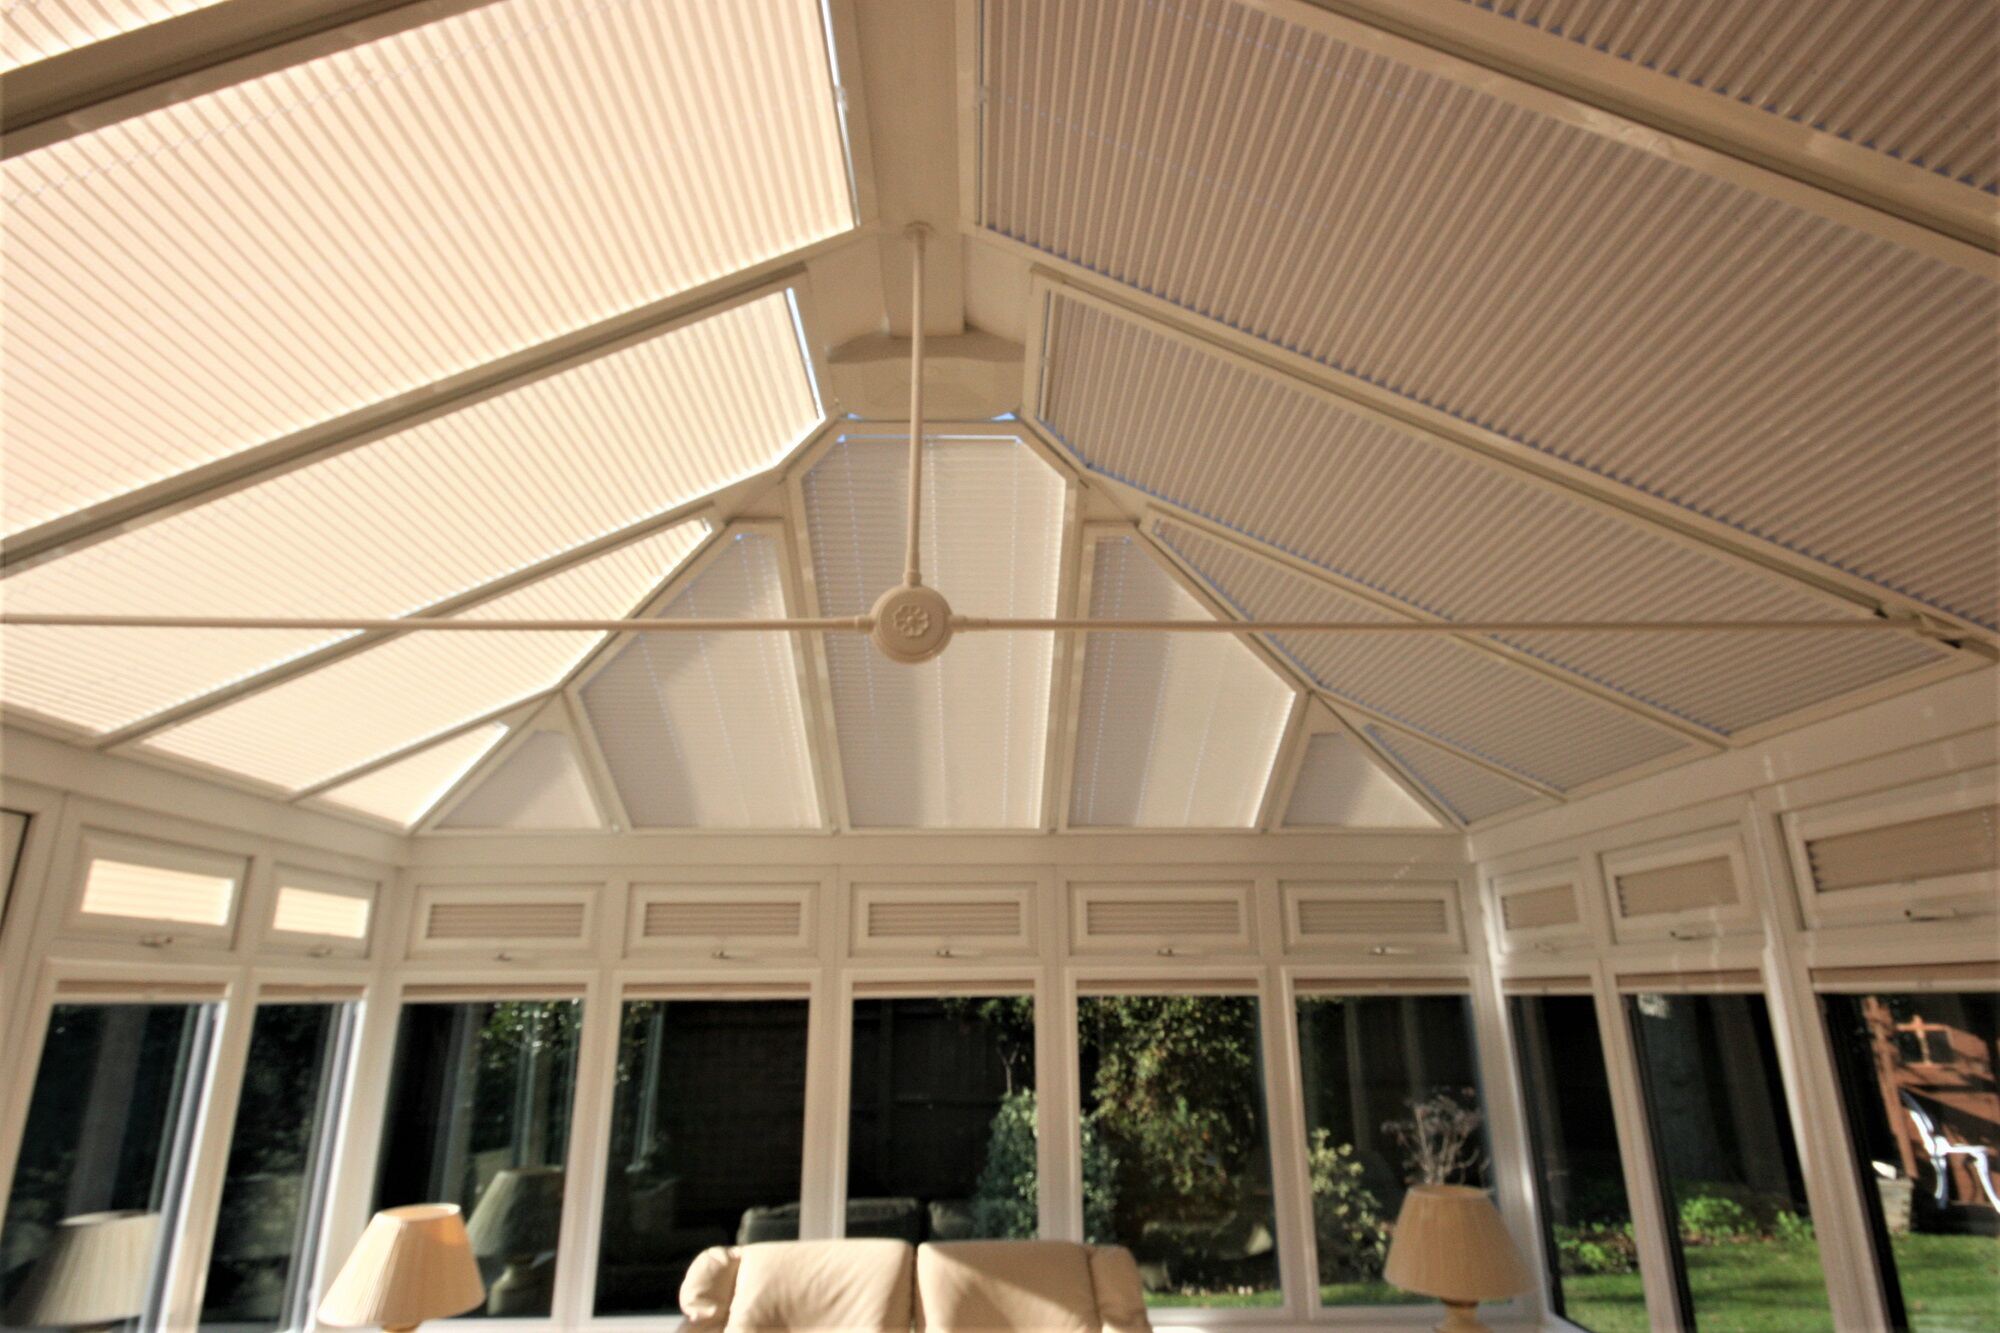 Perfect Fit - The Ideal Choice For Conservatories